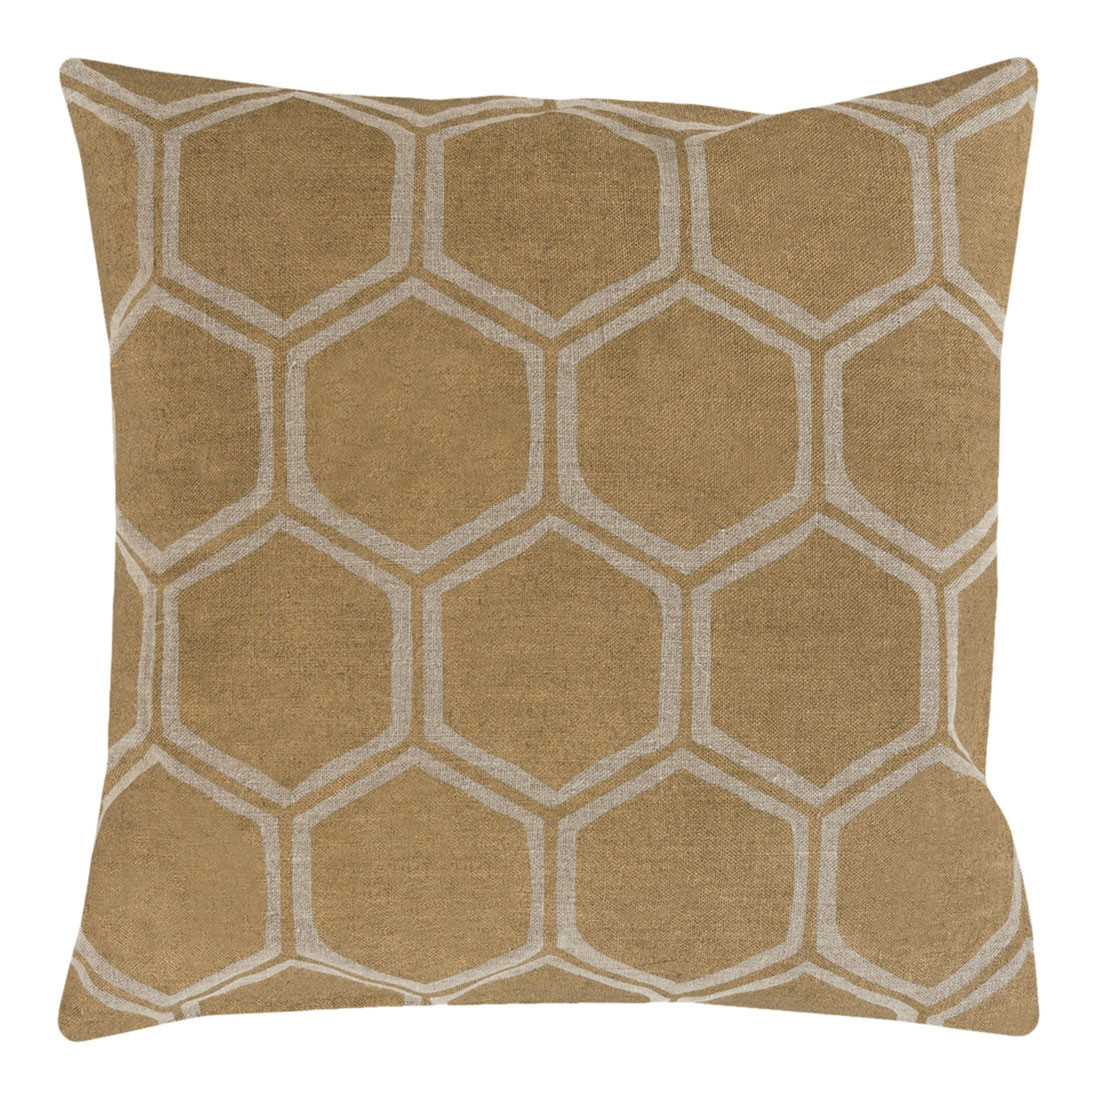 Stamped Linen Honeycomb Pillow - MS-007
18 x 18 inches
Linen 
Gold

